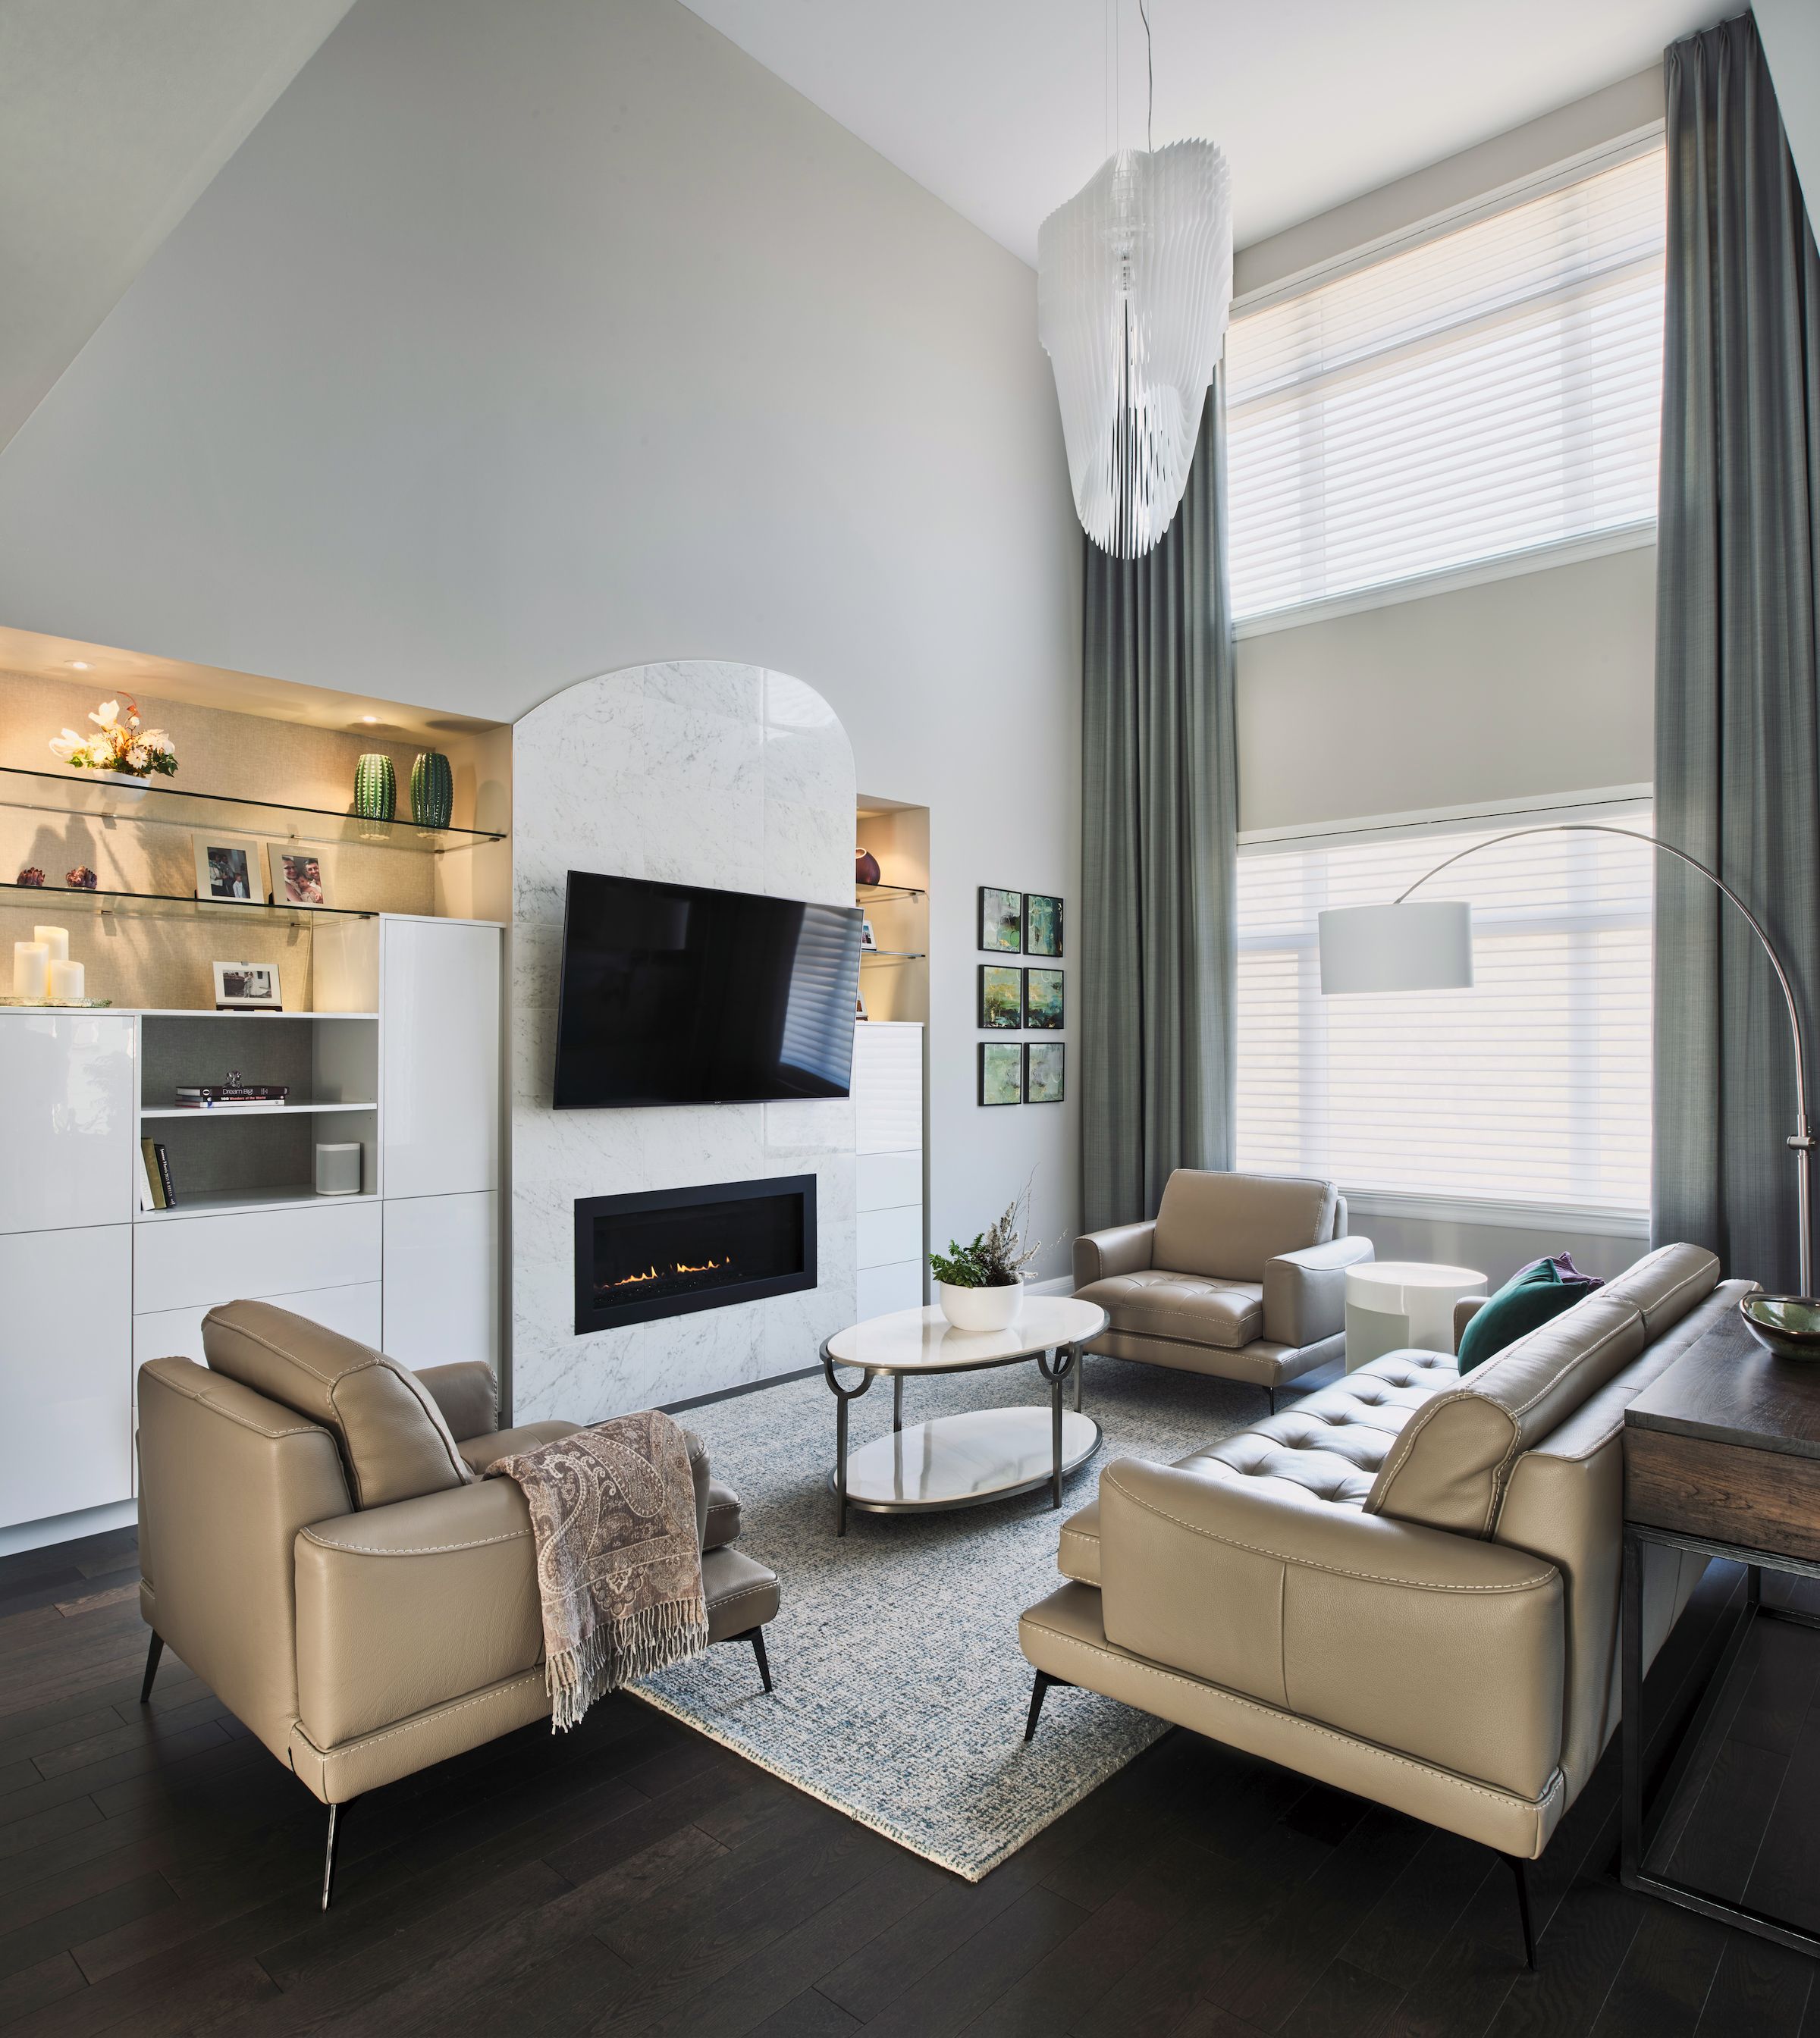 Designer Approved Tips To Make The Most Of High Ceilings